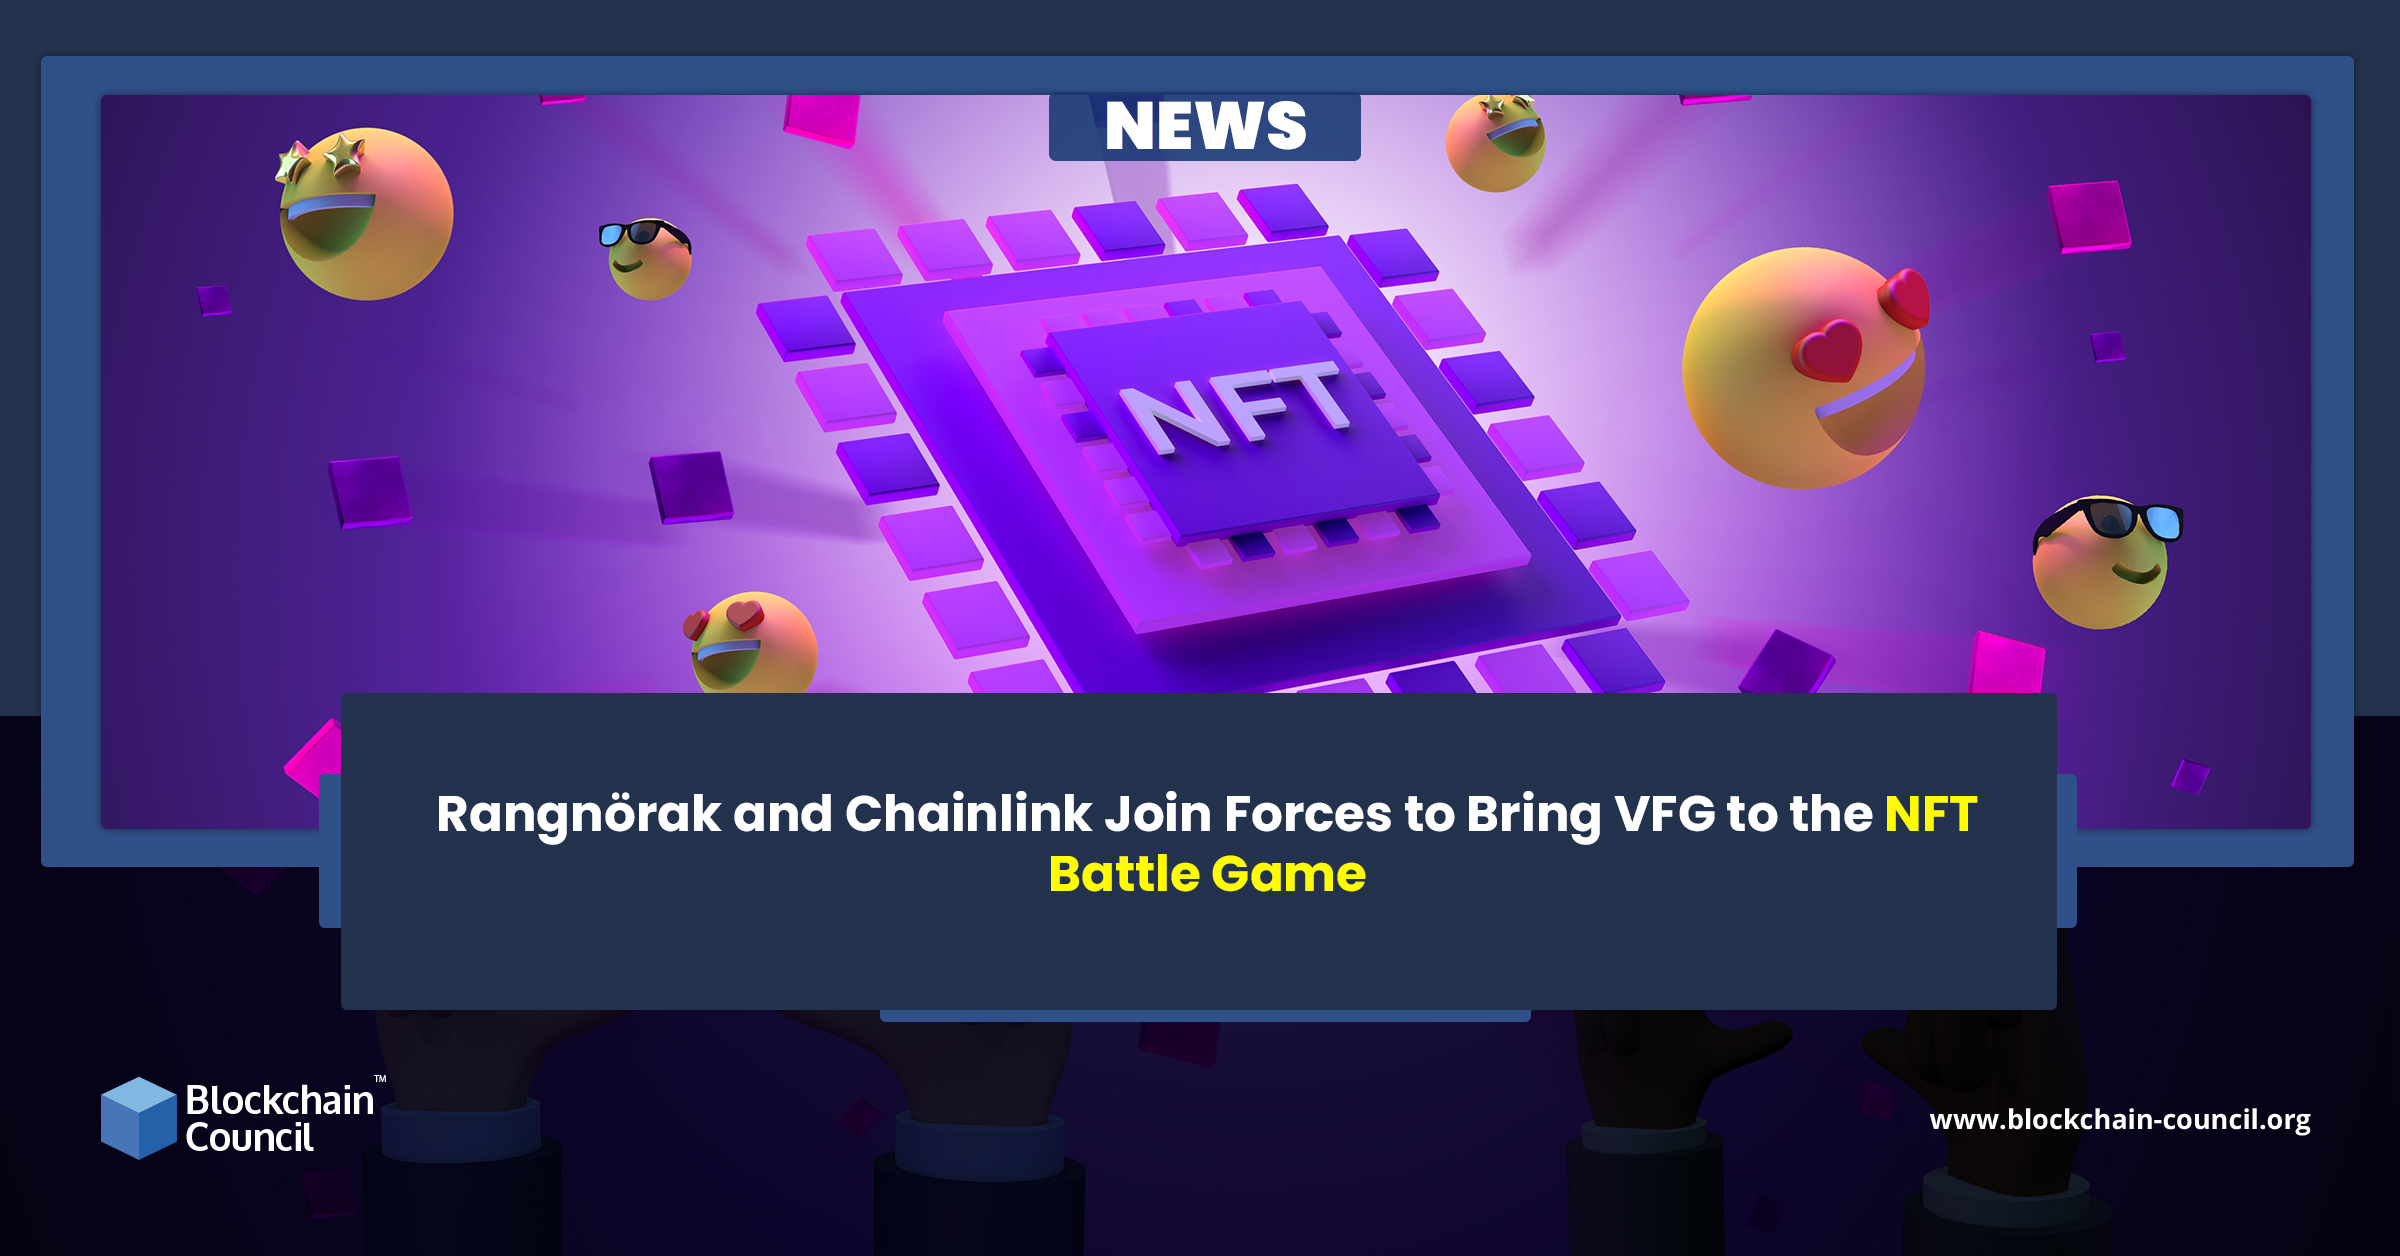 Rangnörak and Chainlink Join Forces to Bring VFG to the NFT Battle Game